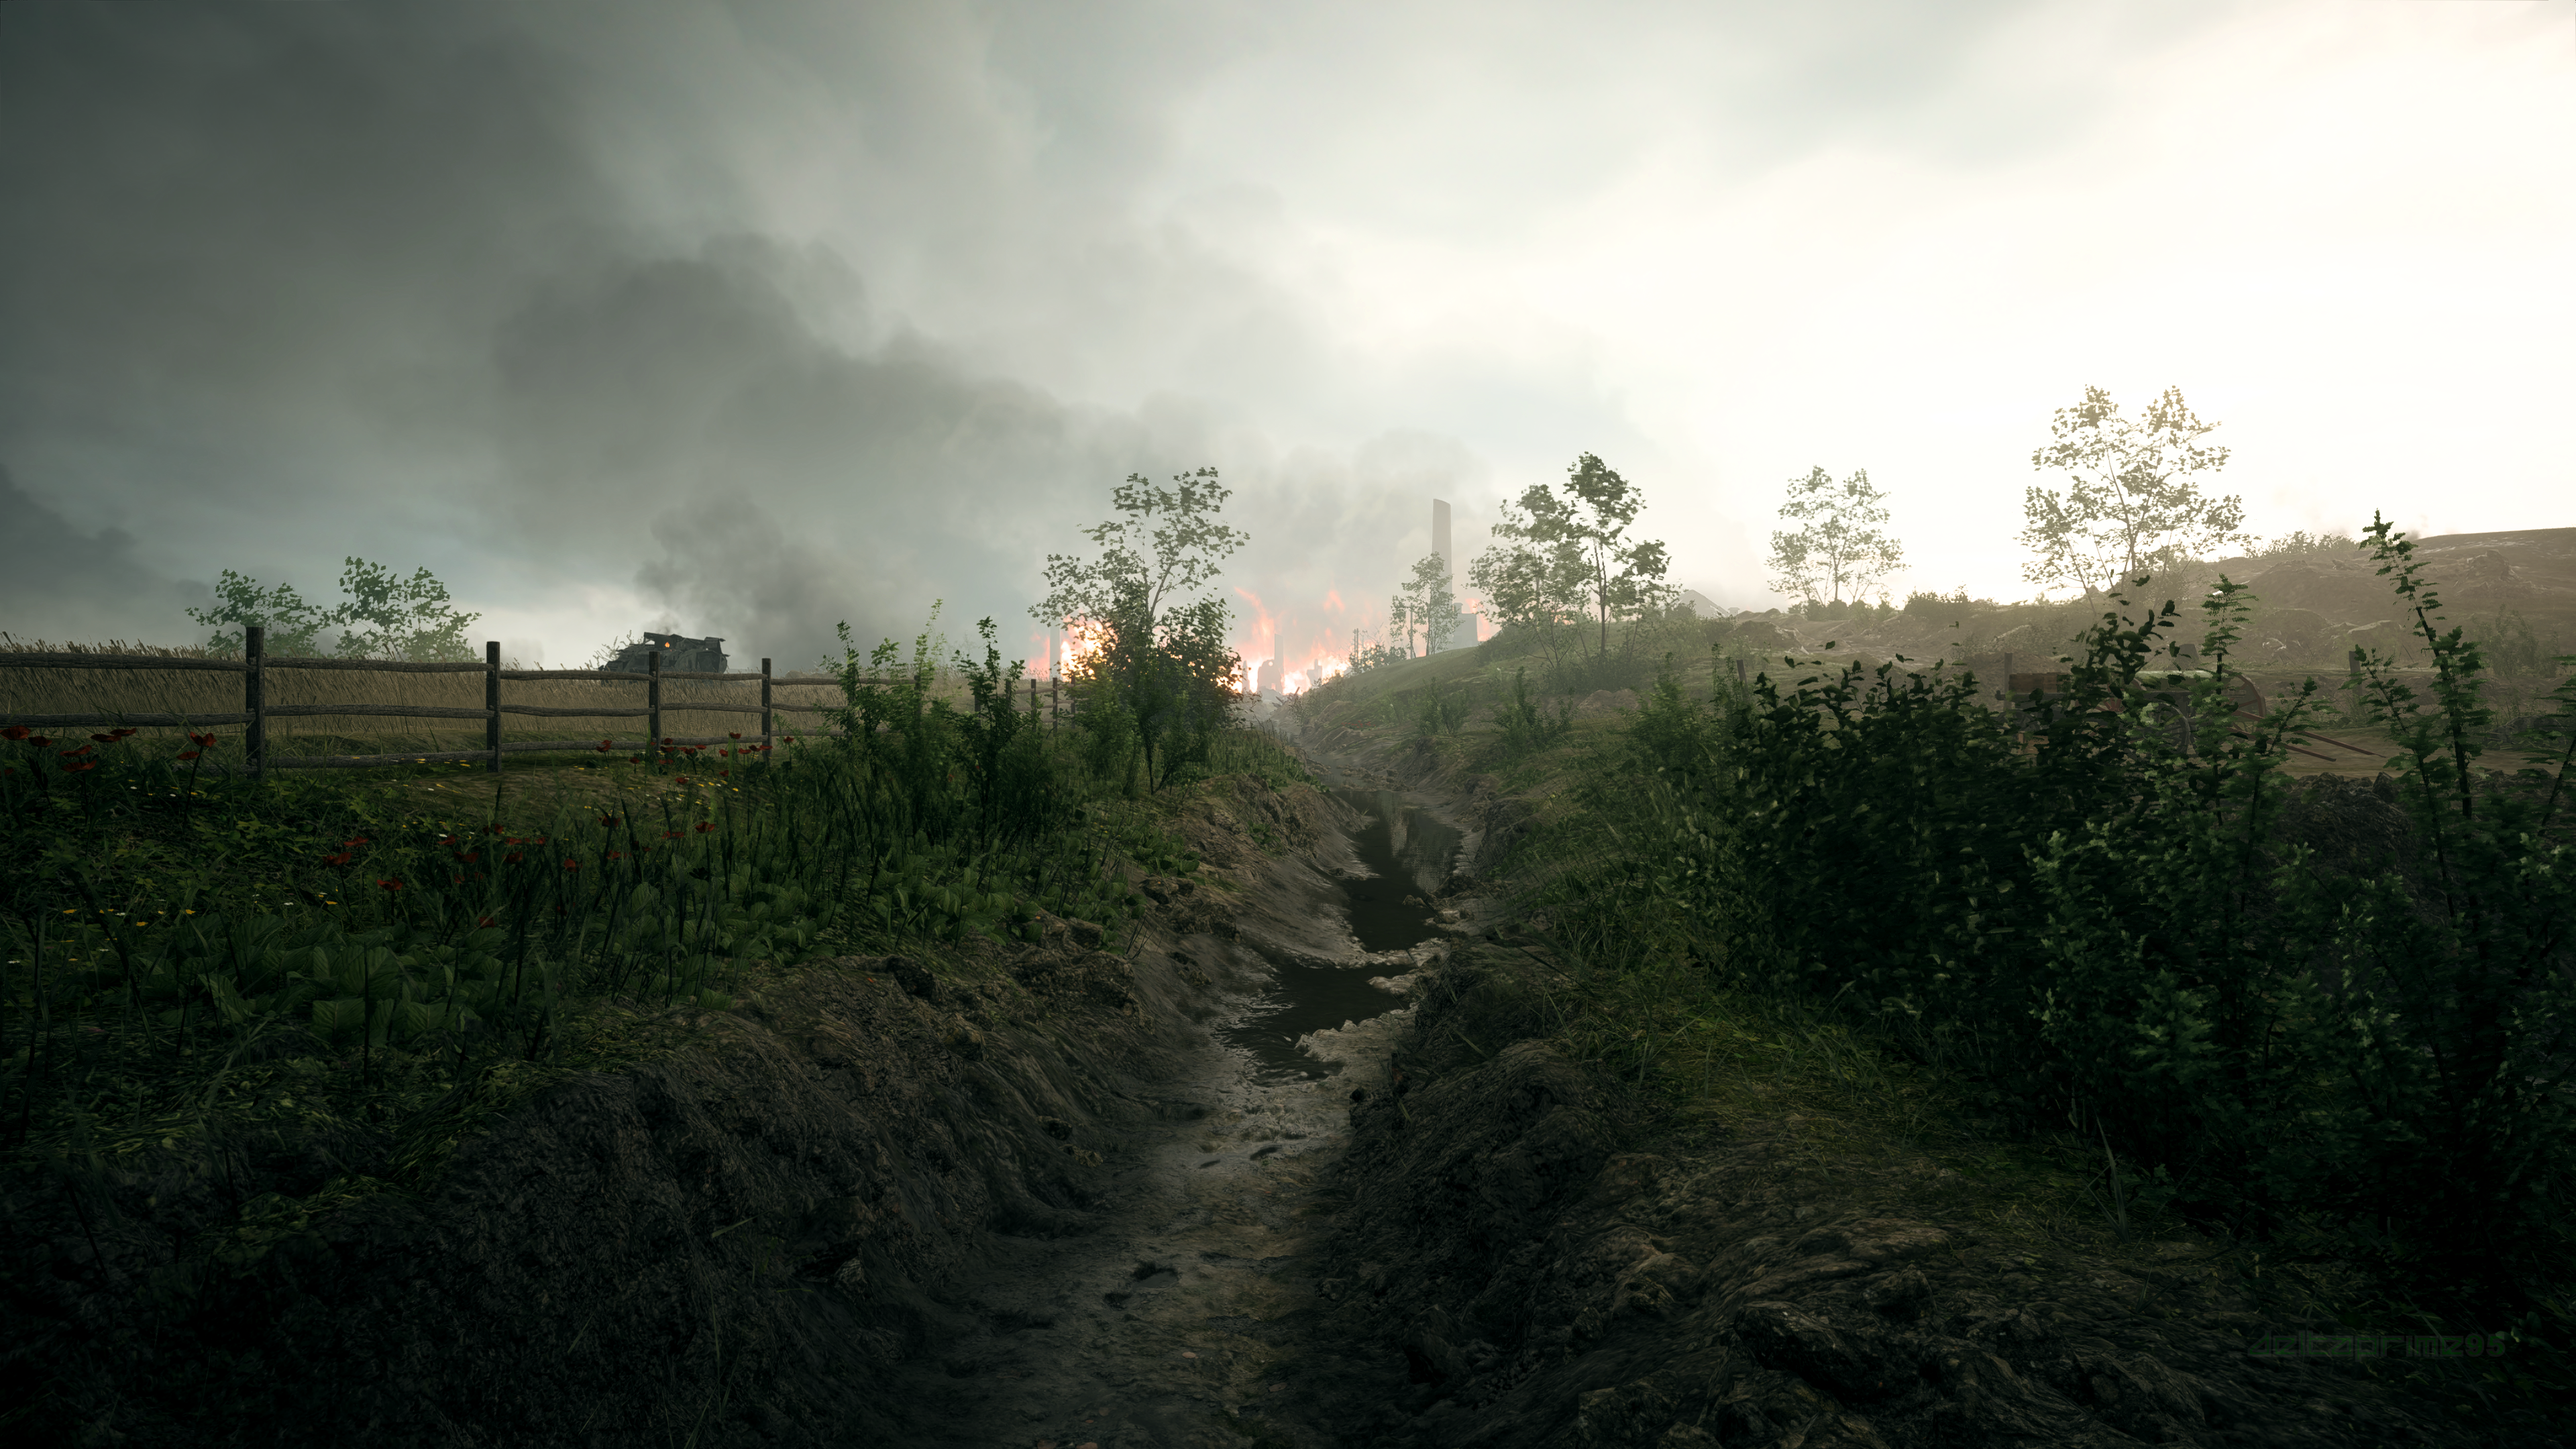 PC Gaming Screen Shot In Game World War I River Somme France Battlefield 1 Trenches Field Destructio 3840x2160